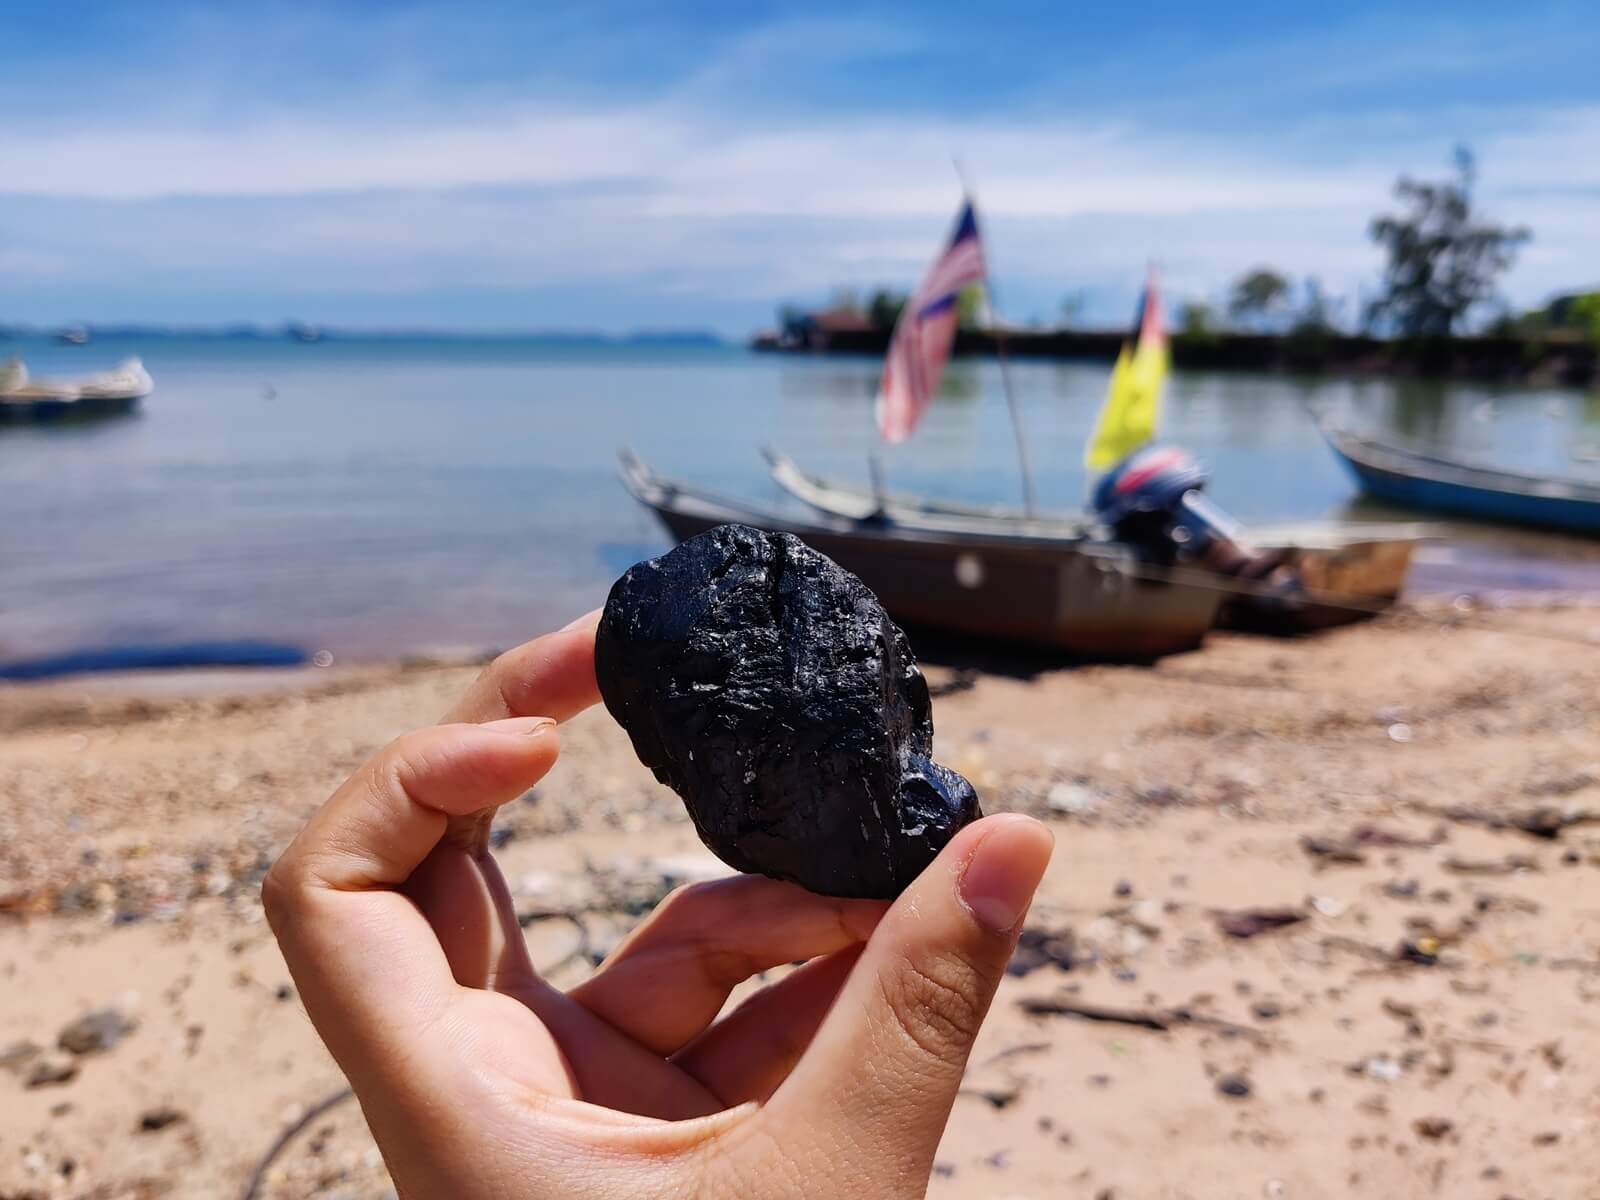 Many pieces of coal wash up on the beach next to a jetty that used to transport coal in Negeri Sembilan (Nicole Fong)